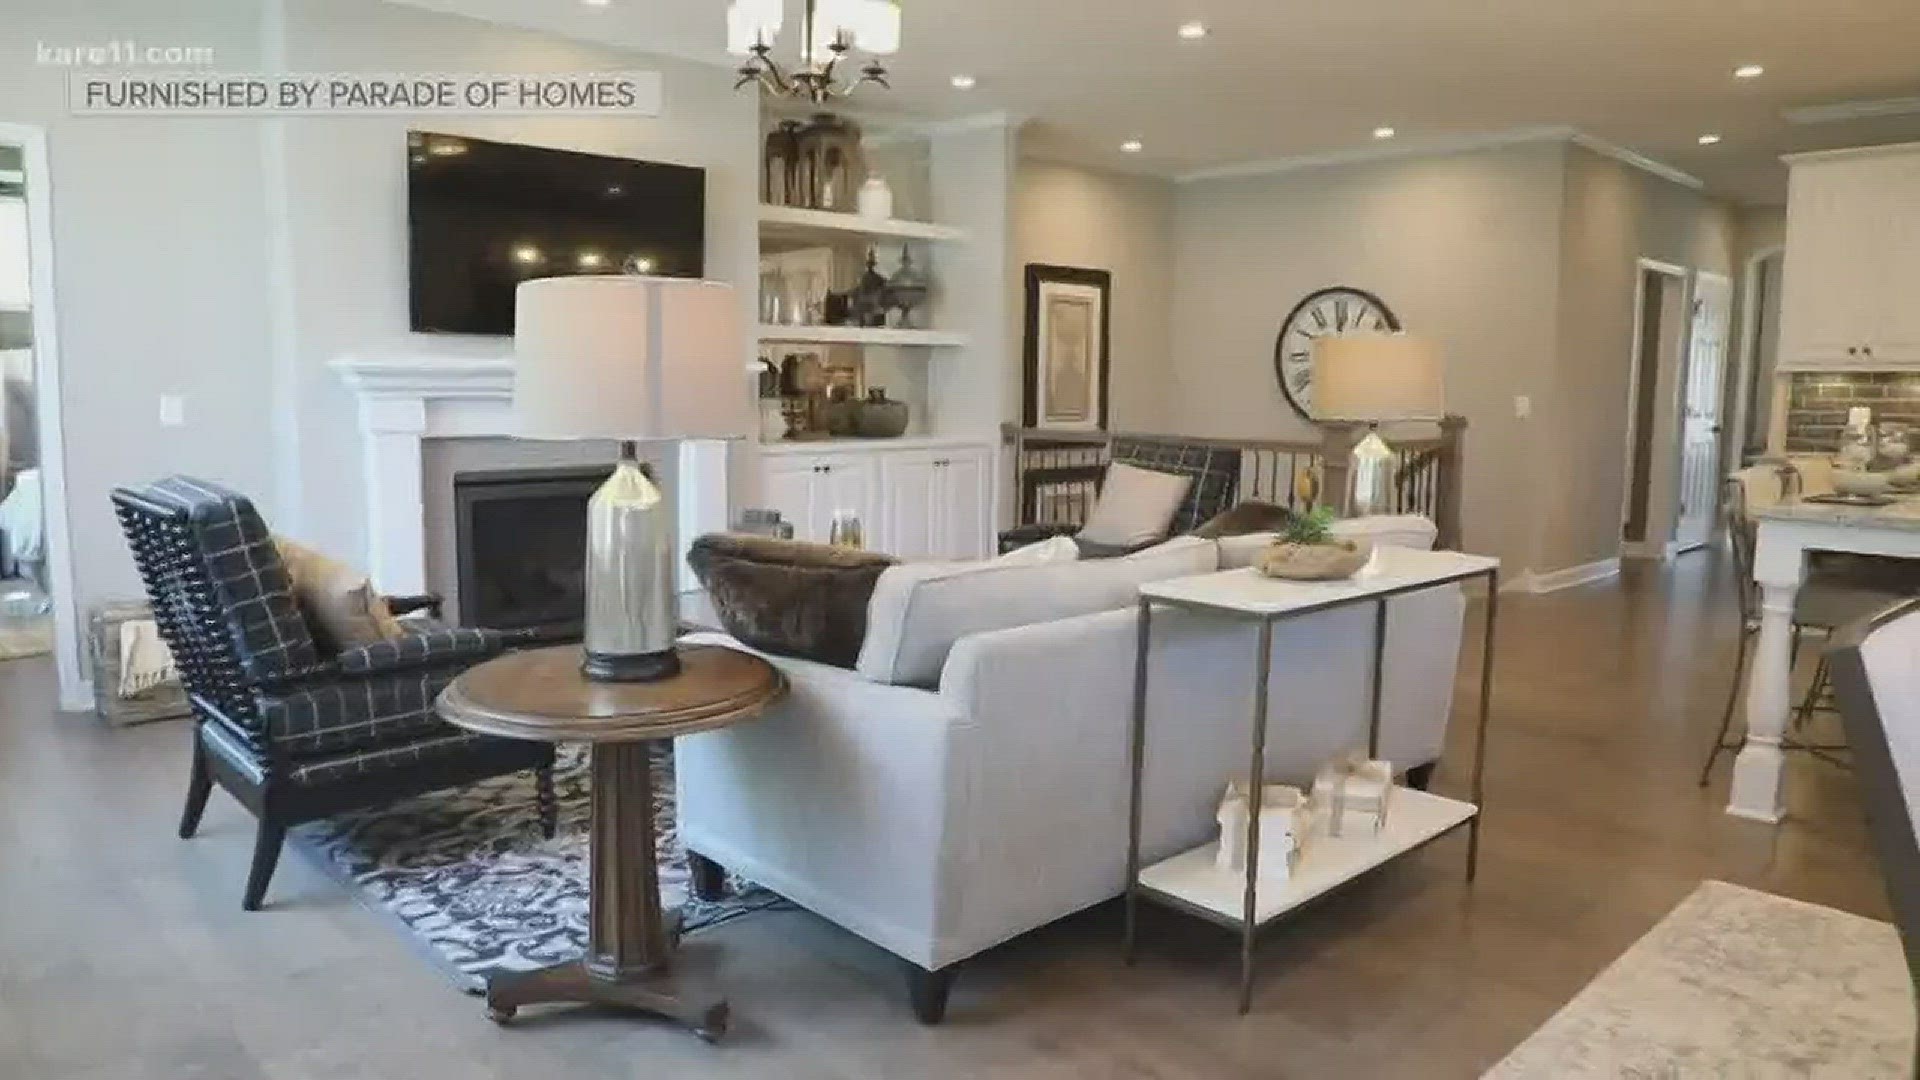 Whether you're looking for a new home or need some design inspiration you will find both at the Fall Parade of Homes.